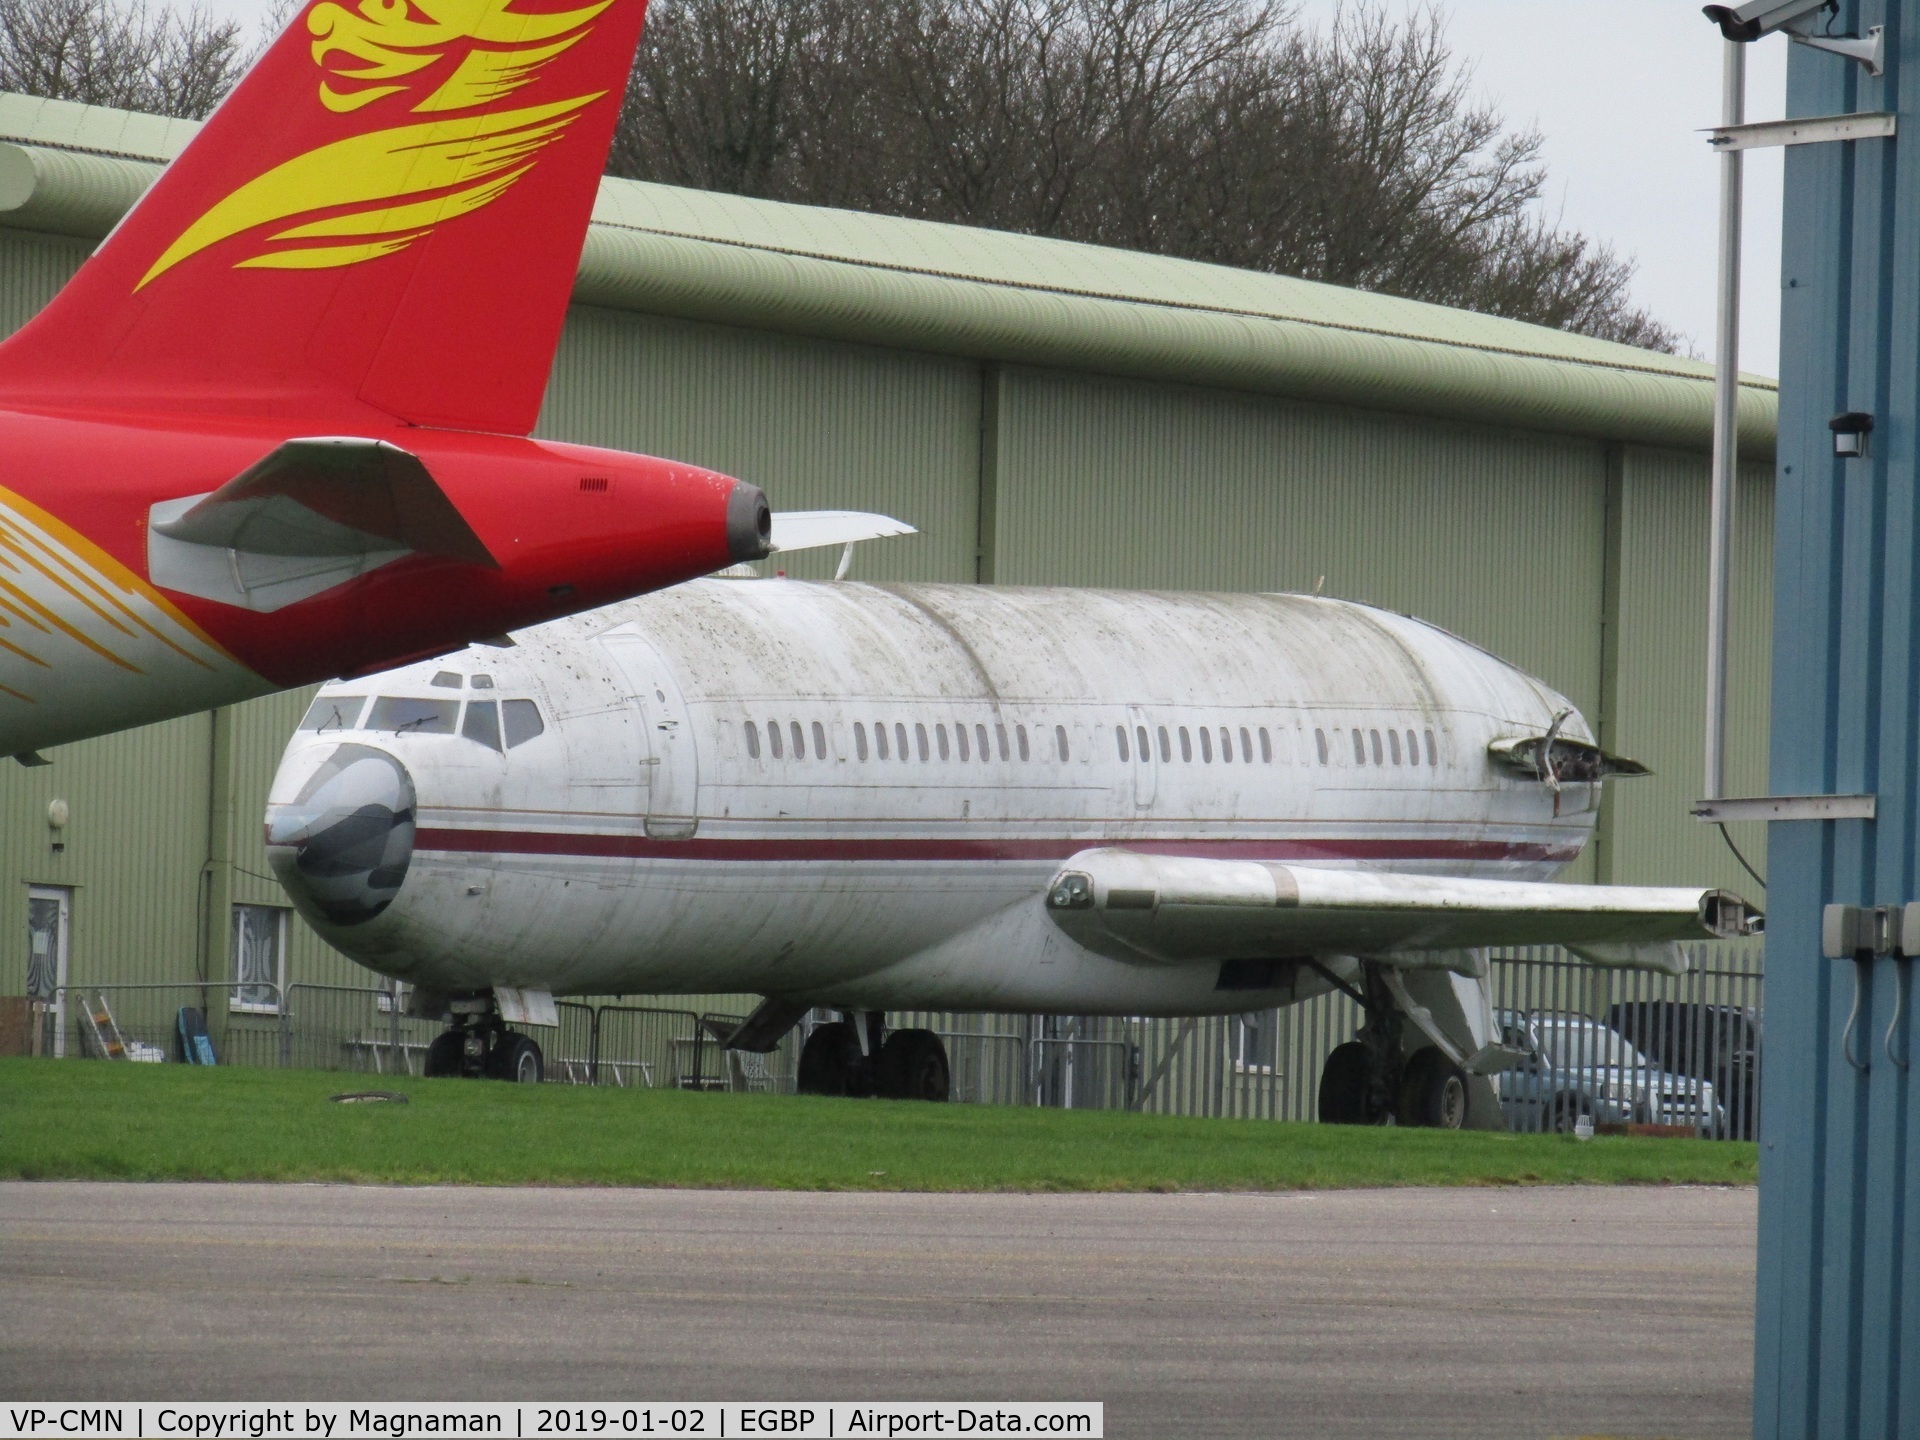 VP-CMN, 1967 Boeing 727-46 C/N 19282, still at Kemble - looks like no longer used as a cabin trainer